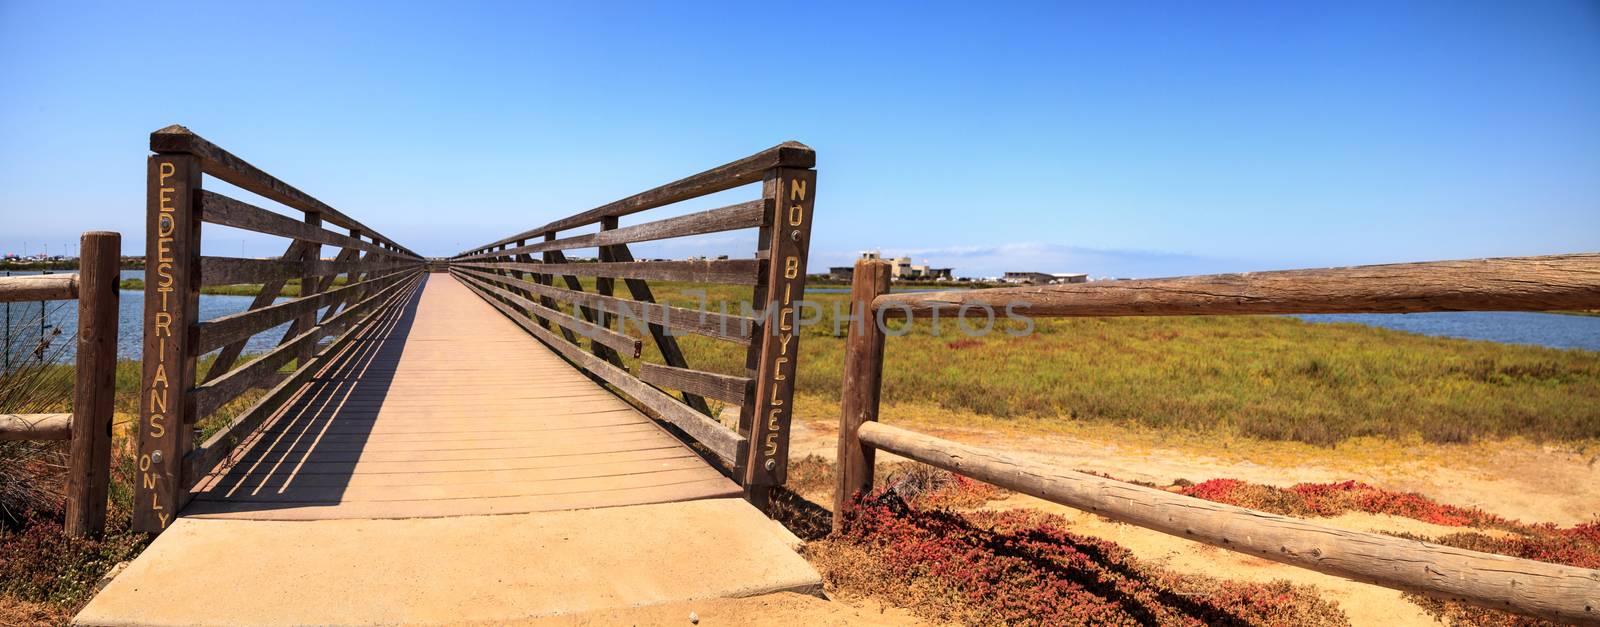 Bridge along the peaceful and tranquil marsh of Bolsa Chica wetl by steffstarr